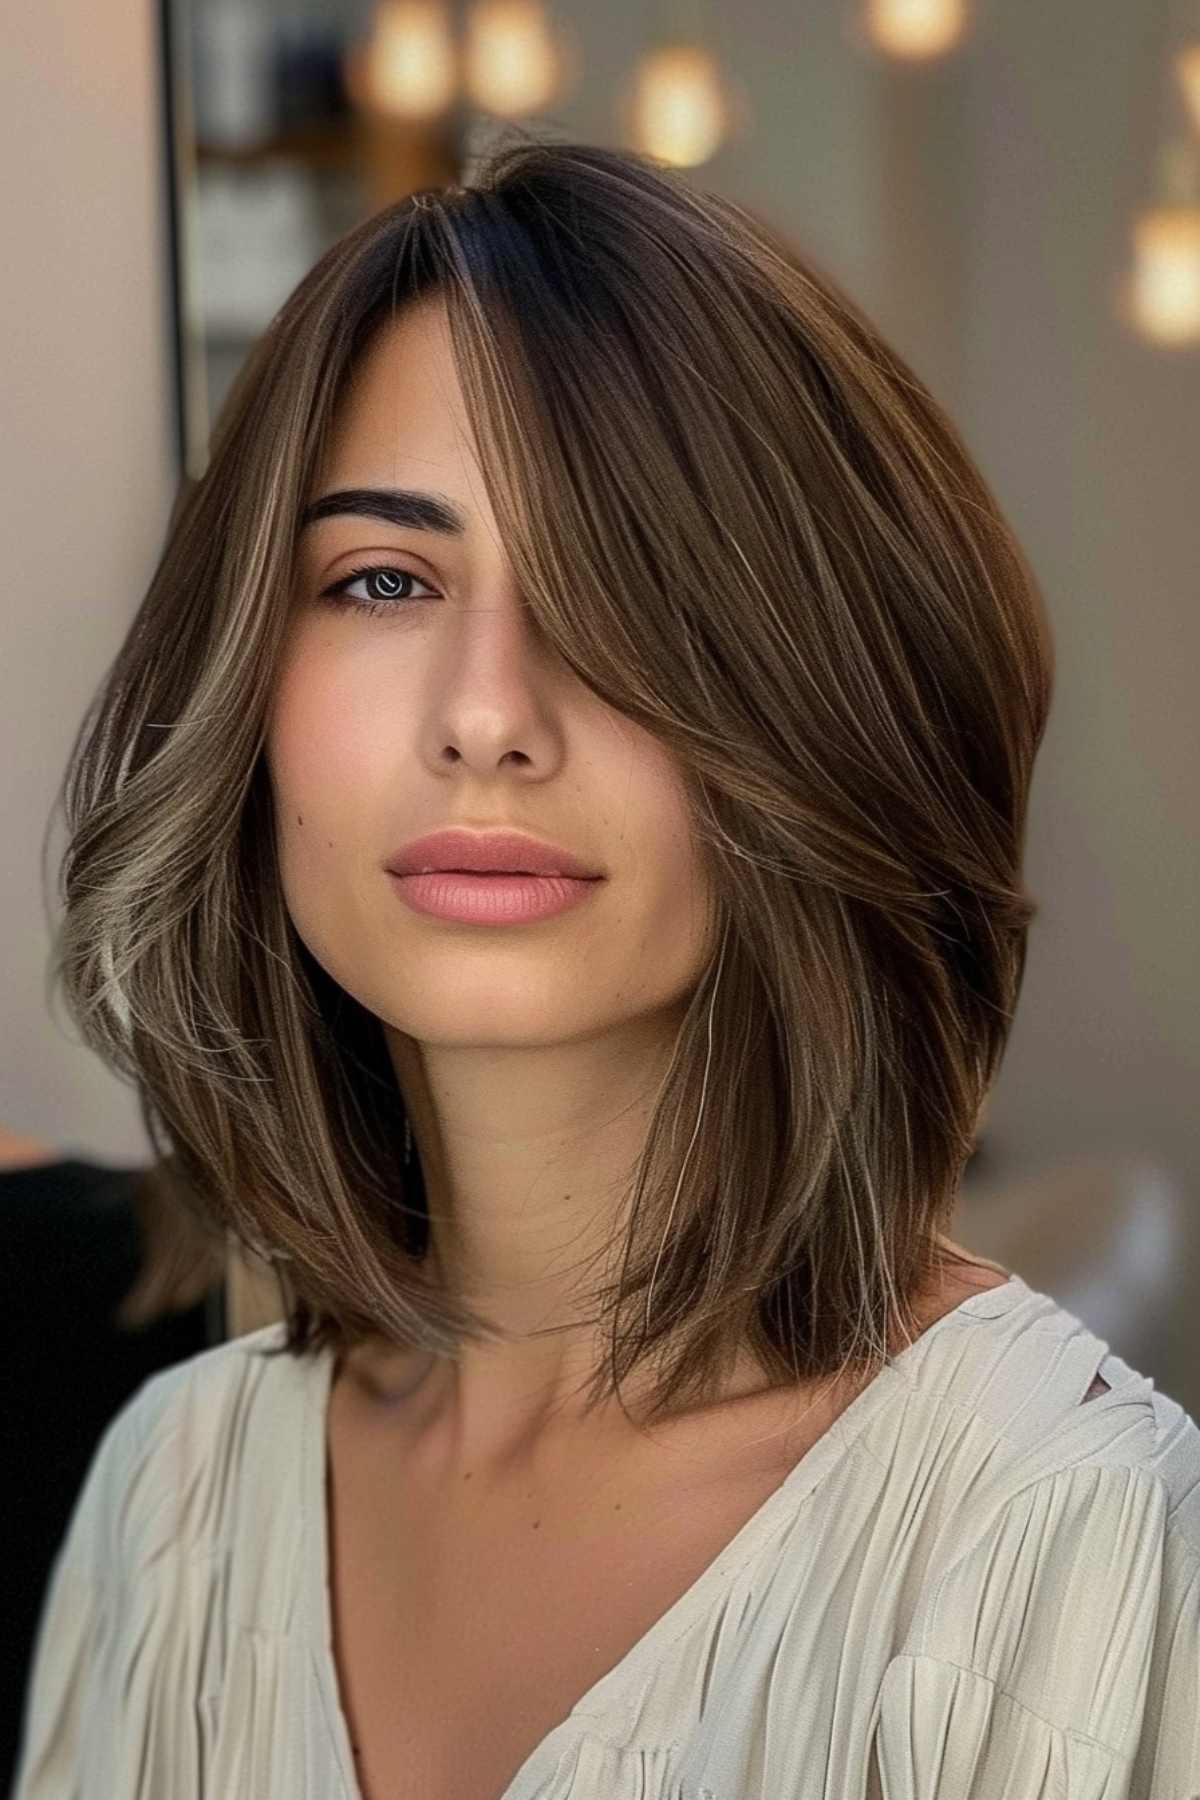 A woman with a chic long bob and side-parted bangs.